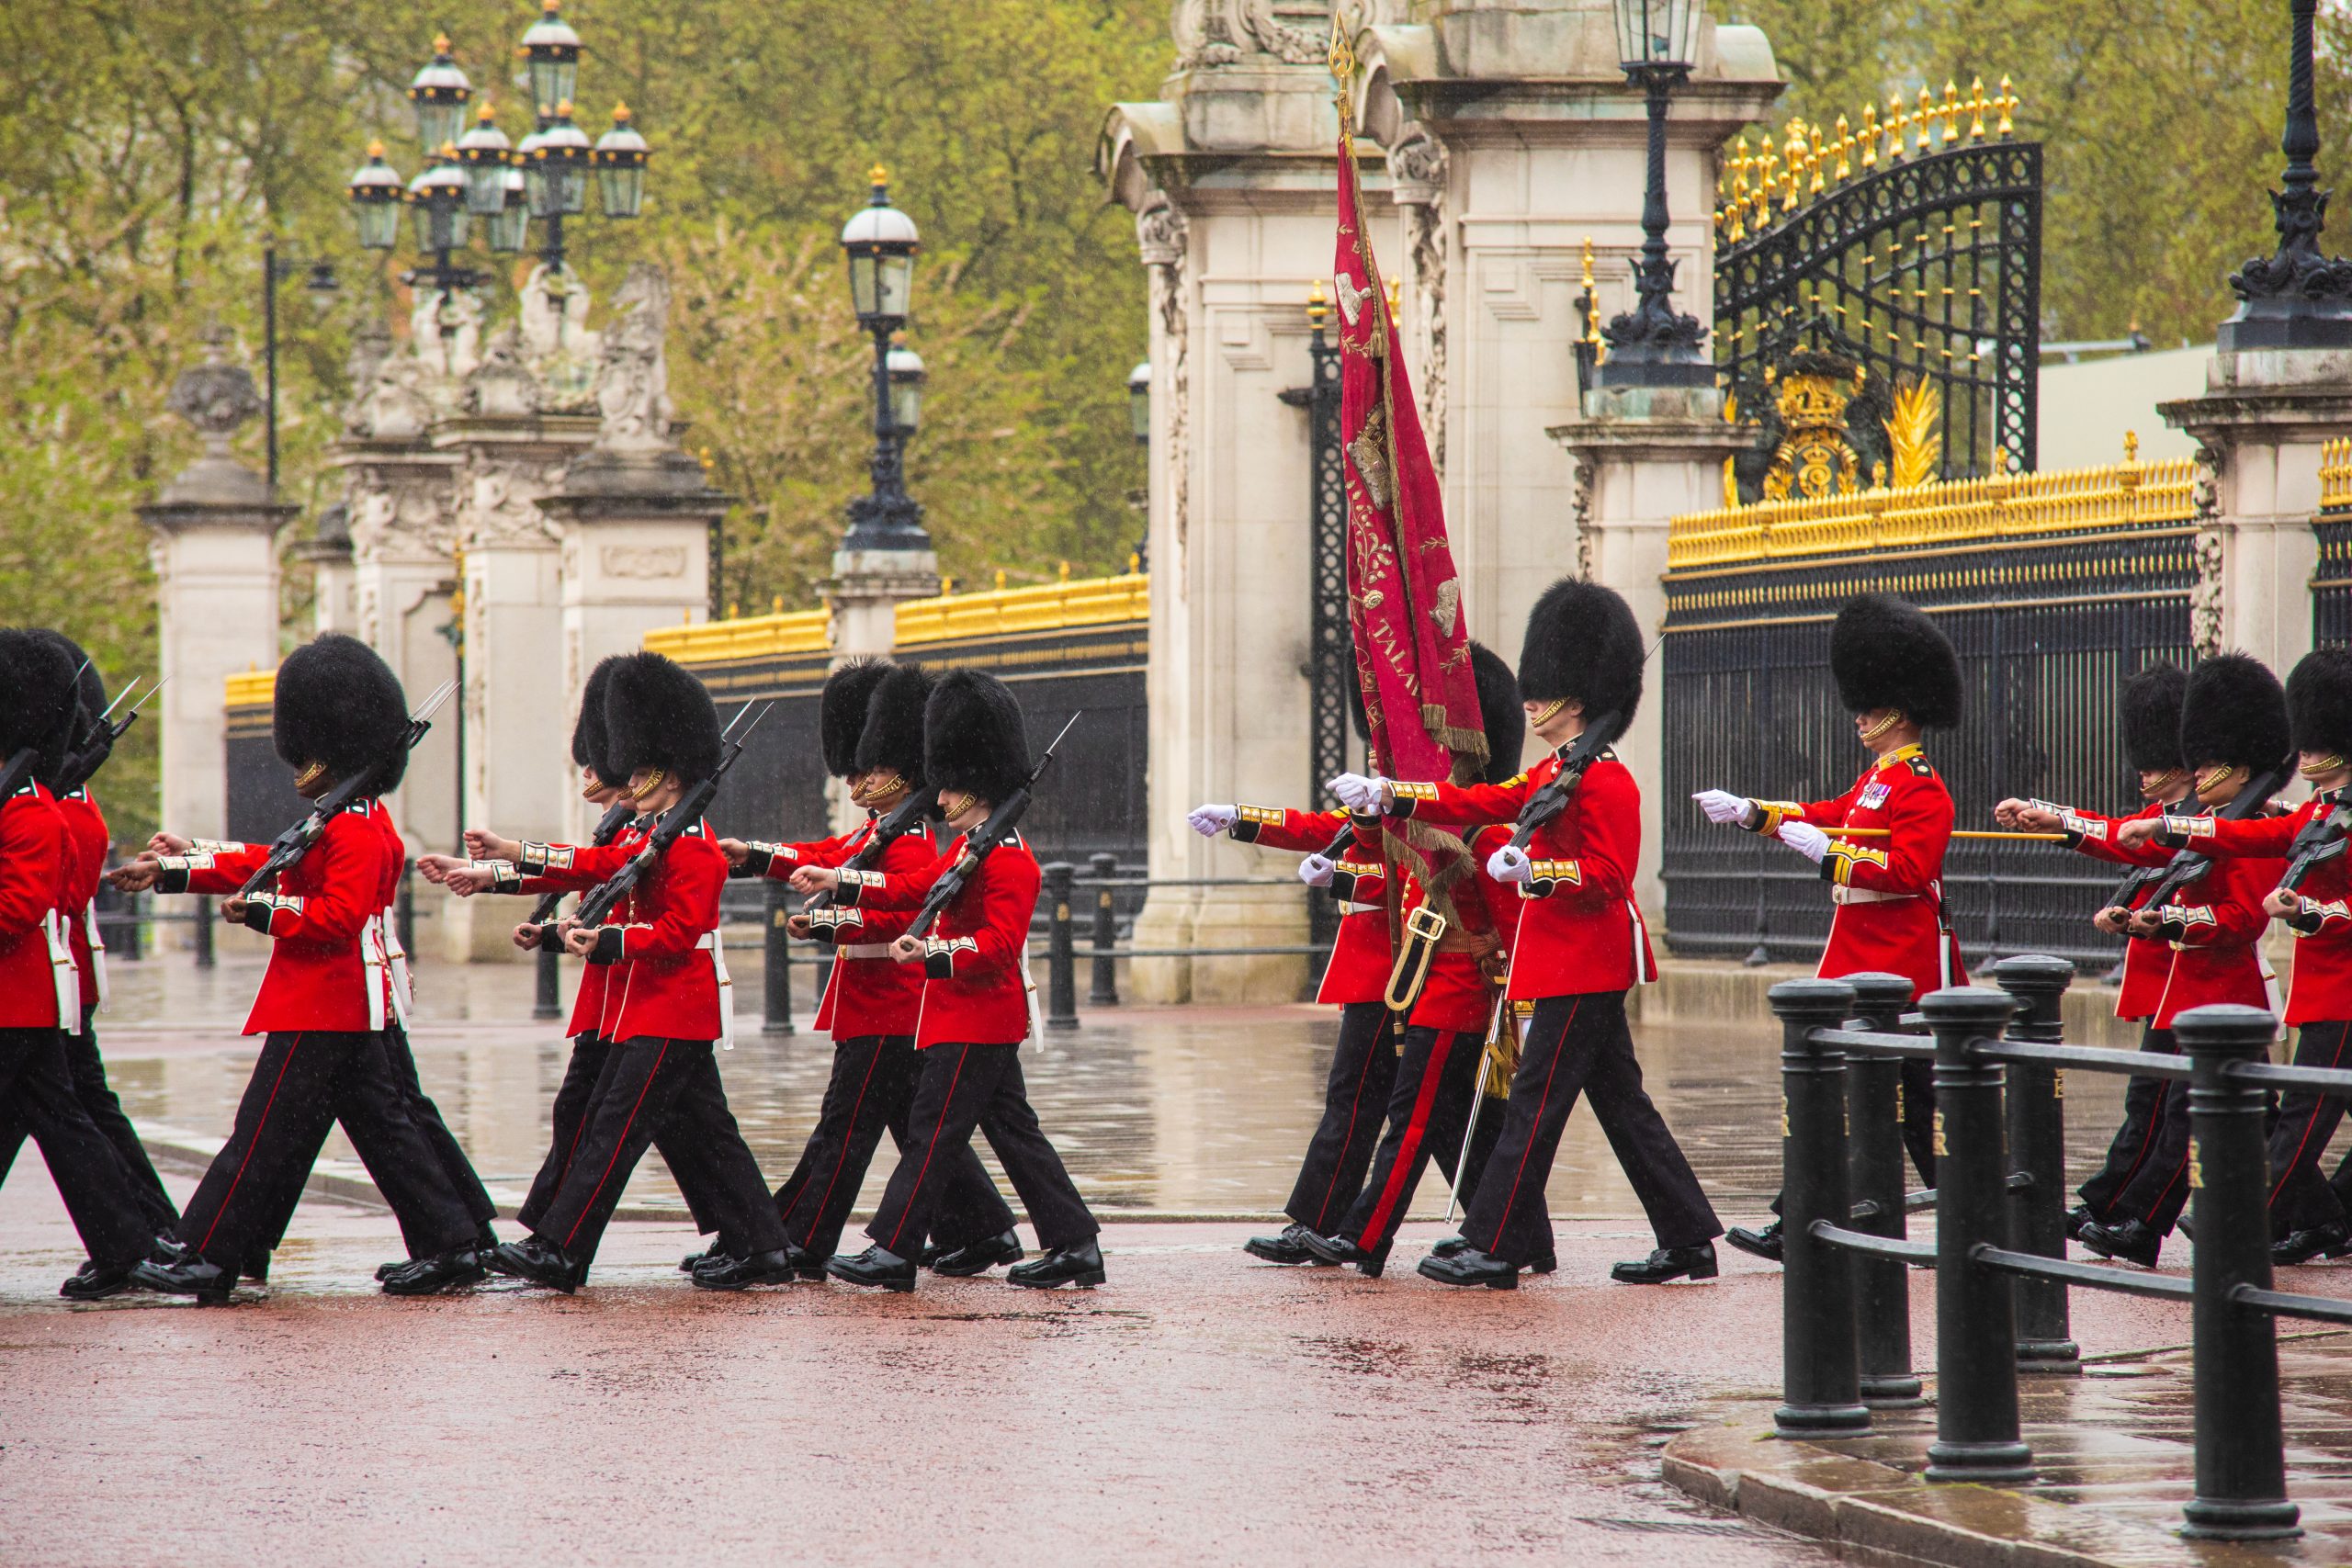 Royal guards march in uniform